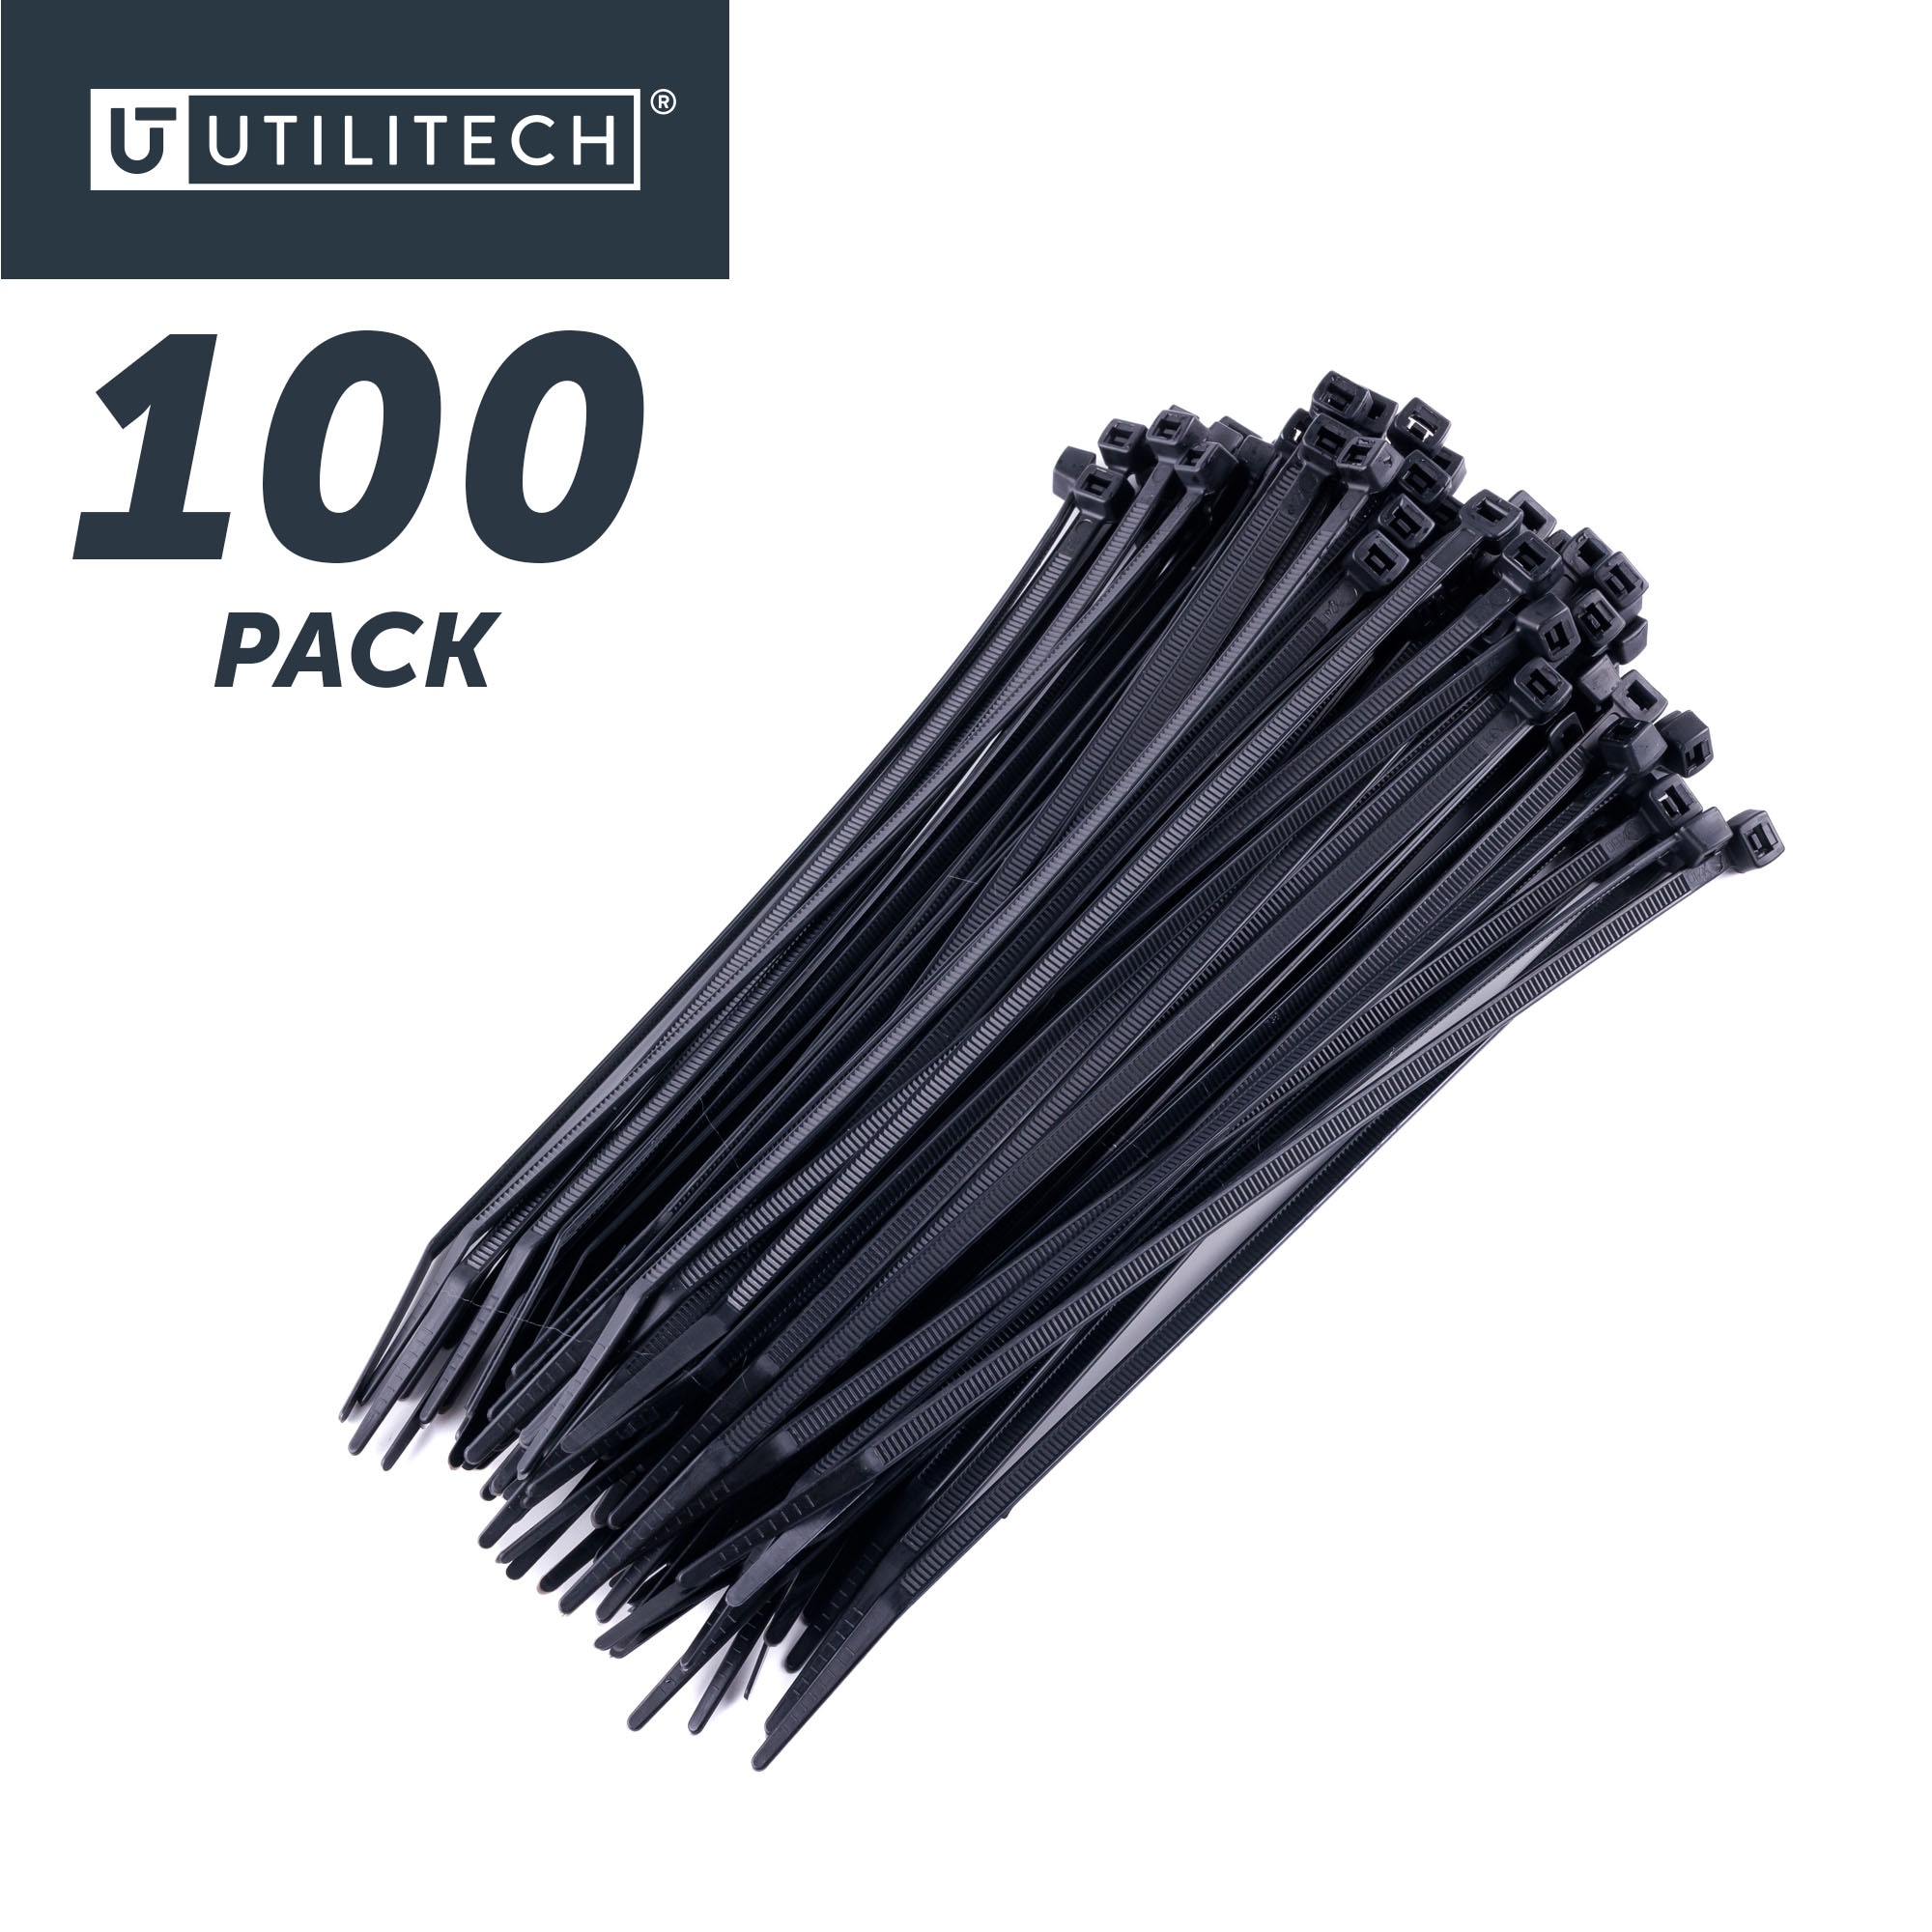 NavePoint 8 Inch Nylon Black Cable Ties 50 Lbs - 100 Pack: Cable Ties